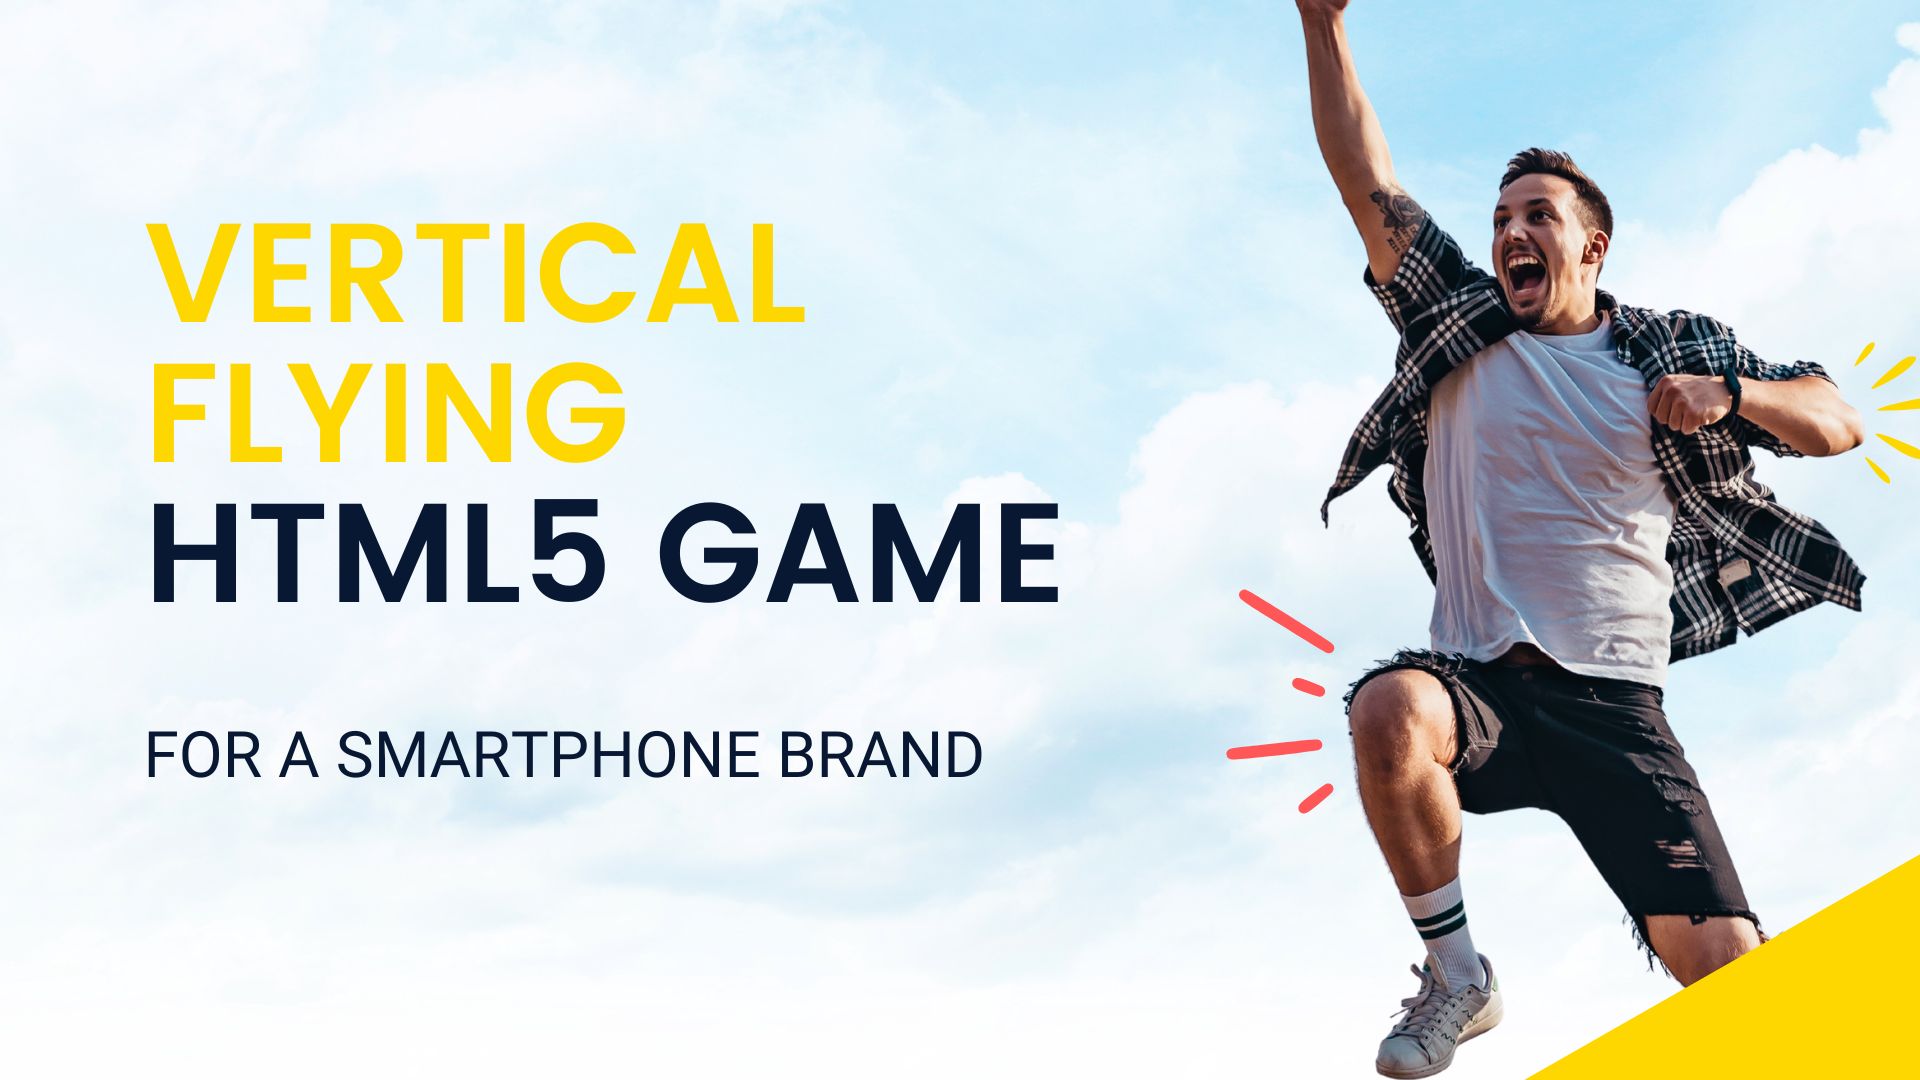 Vertical flying HTML5 game for a smartphone brand